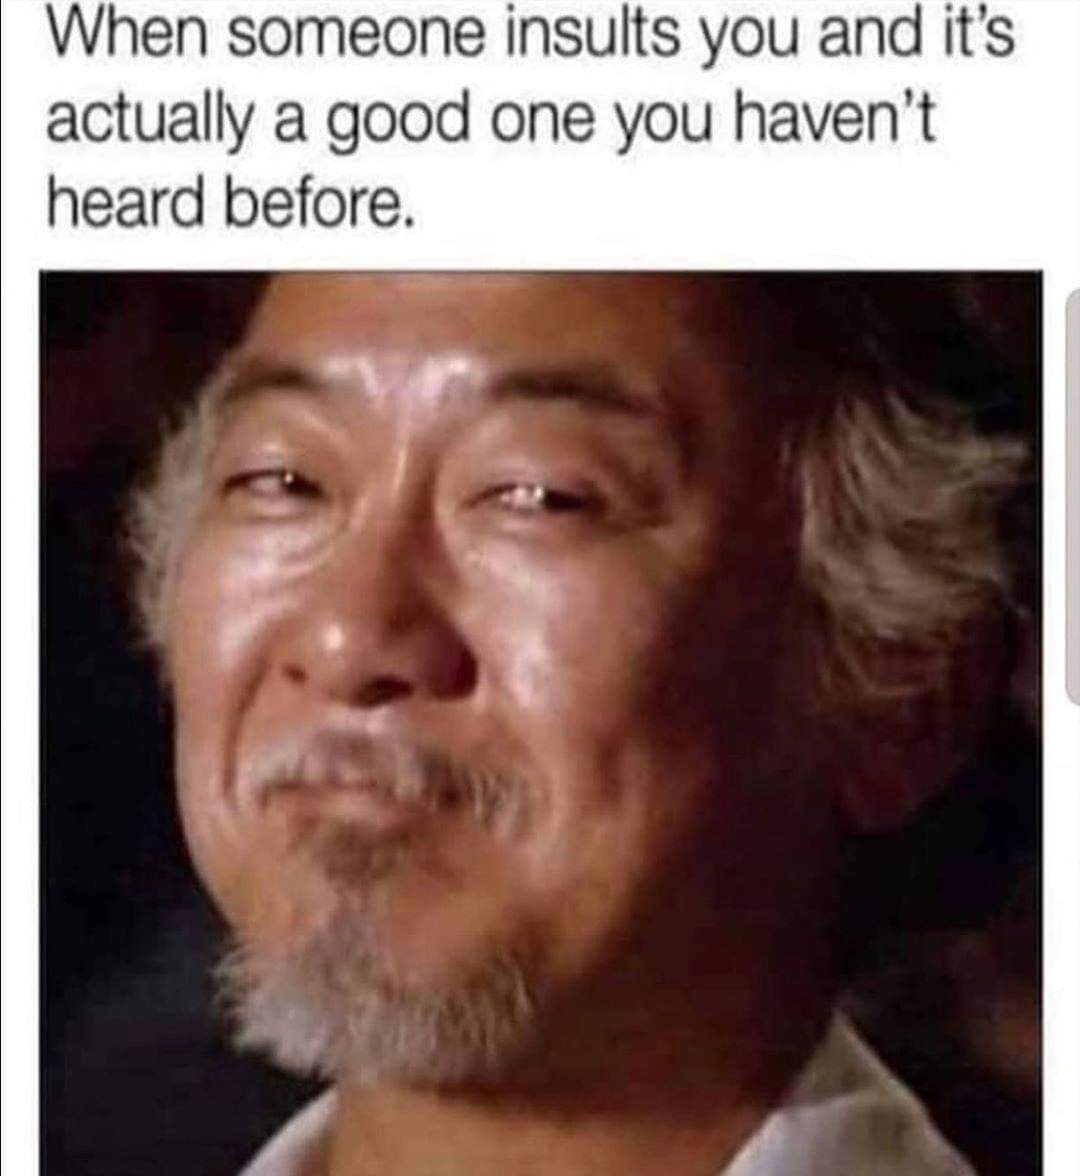 karate kid meme - When someone insults you and it's actually a good one you haven't heard before.